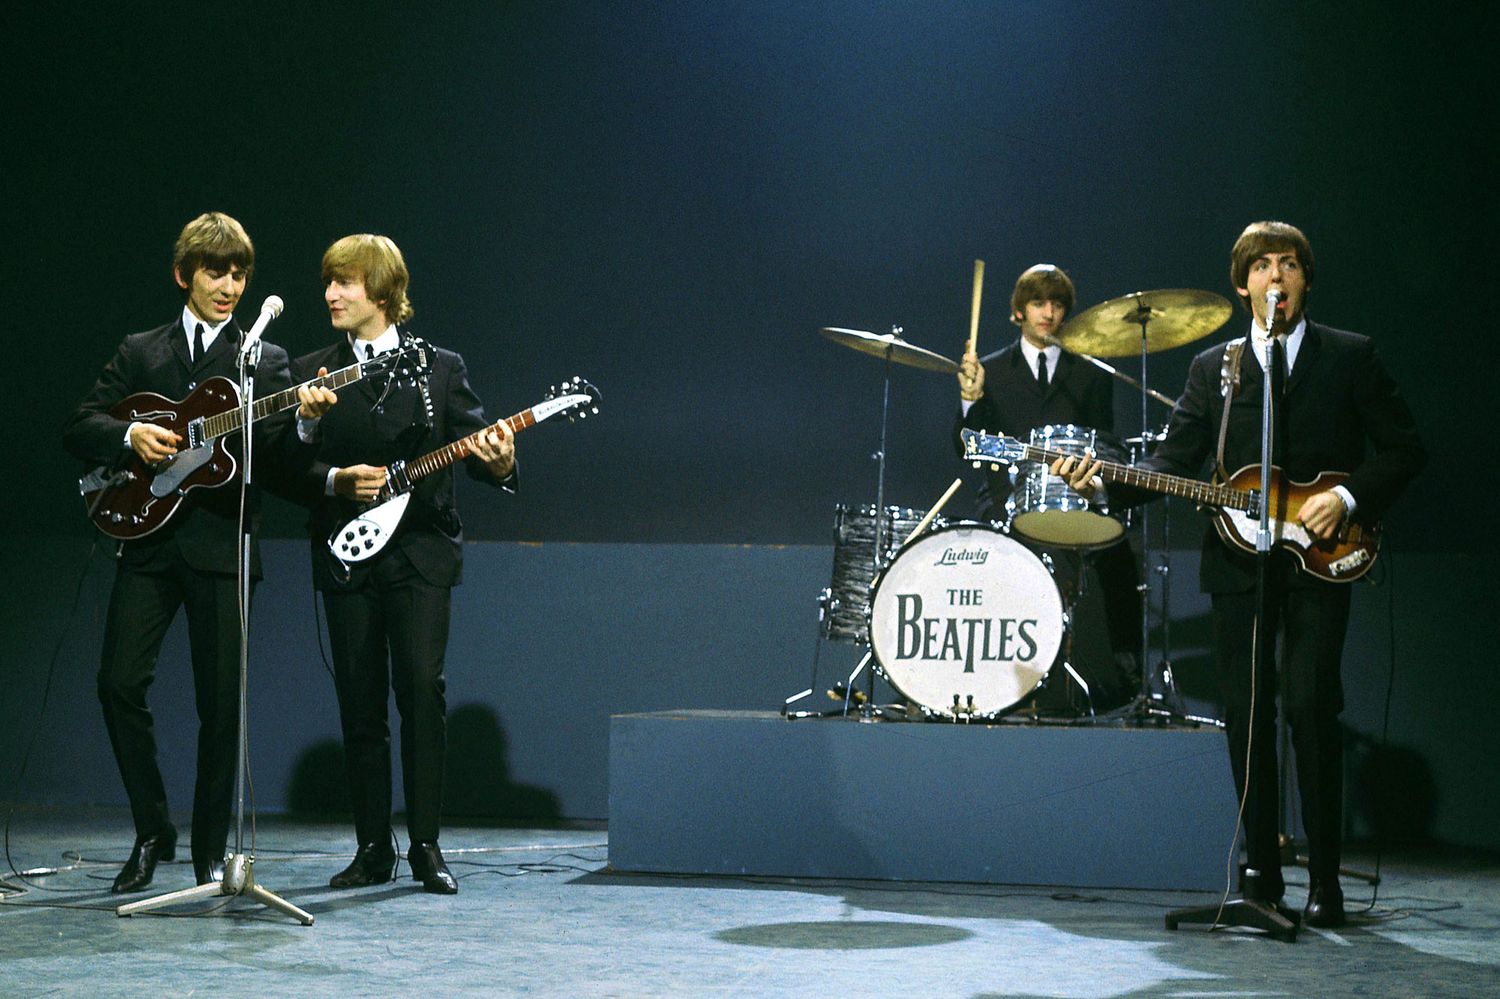 Who Was The Best Songwriter In The Beatles